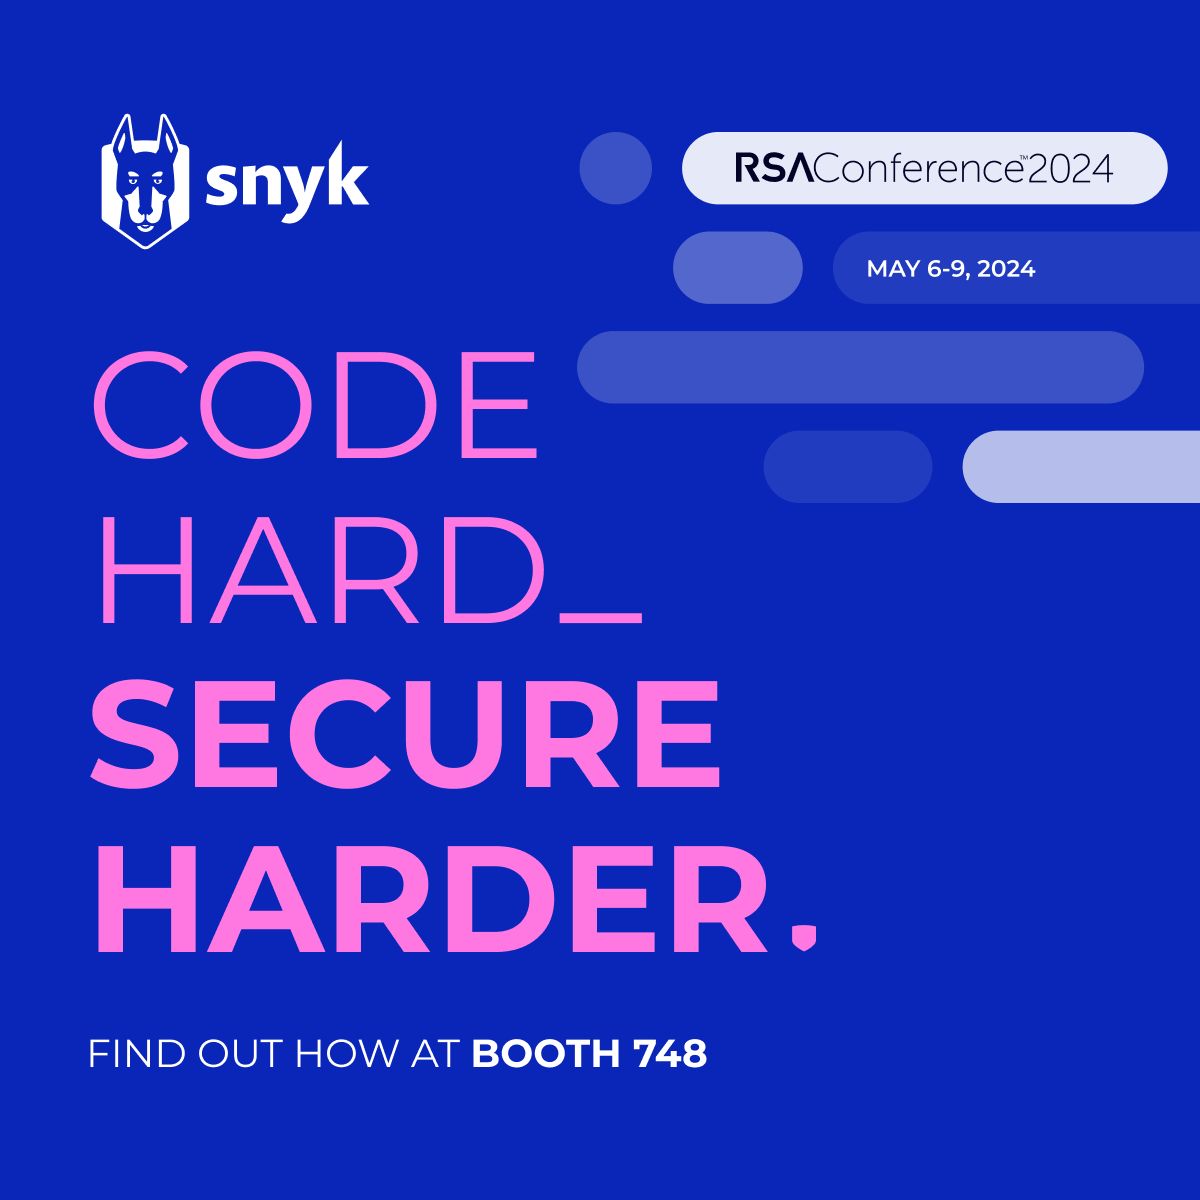 Join Snyk at #RSAC 2024 to get your app security posture in fighting shape! 💪 Swing by booth #748 to see a live demo of Snyk customized to meet your #AppSec needs. Find out how you can connect with us on and off the showfloor: snyk.co/ugO7g